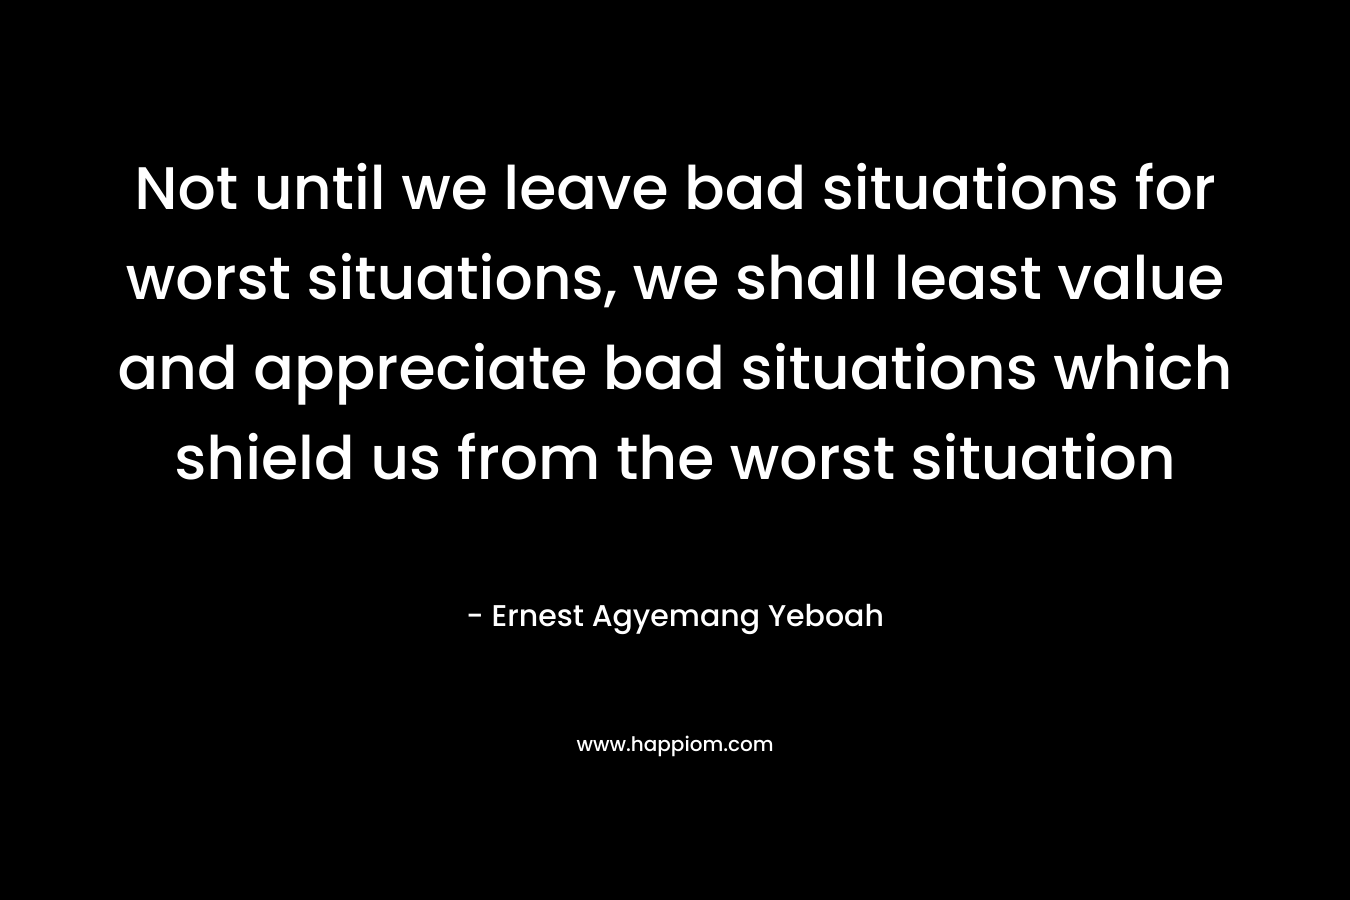 Not until we leave bad situations for worst situations, we shall least value and appreciate bad situations which shield us from the worst situation